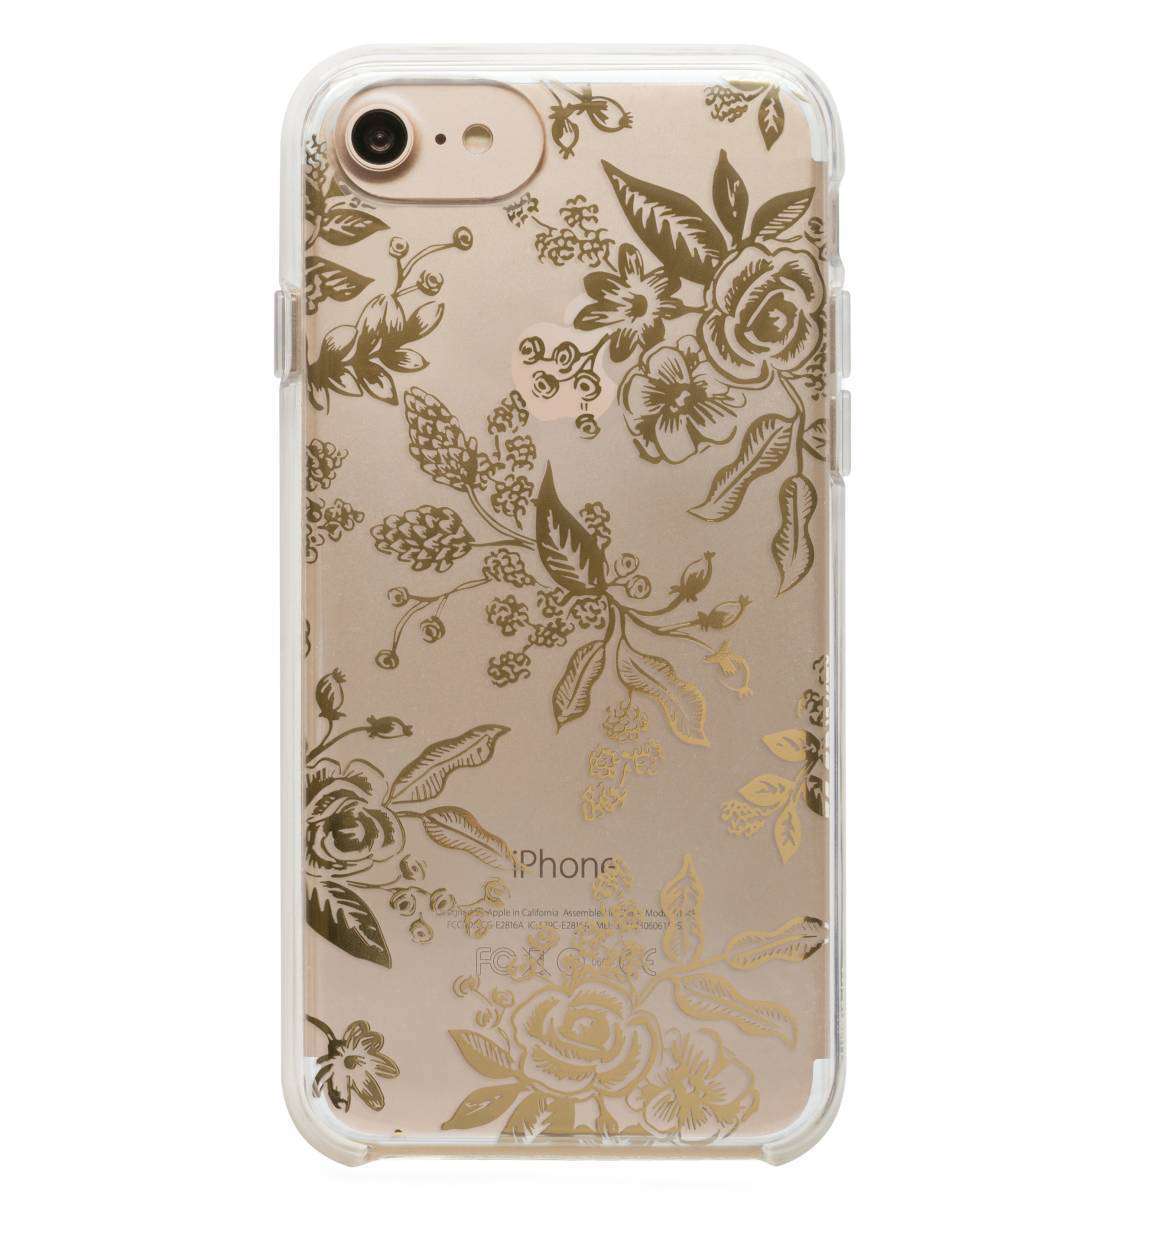 Modest Women's Gold Floral iPhone cover